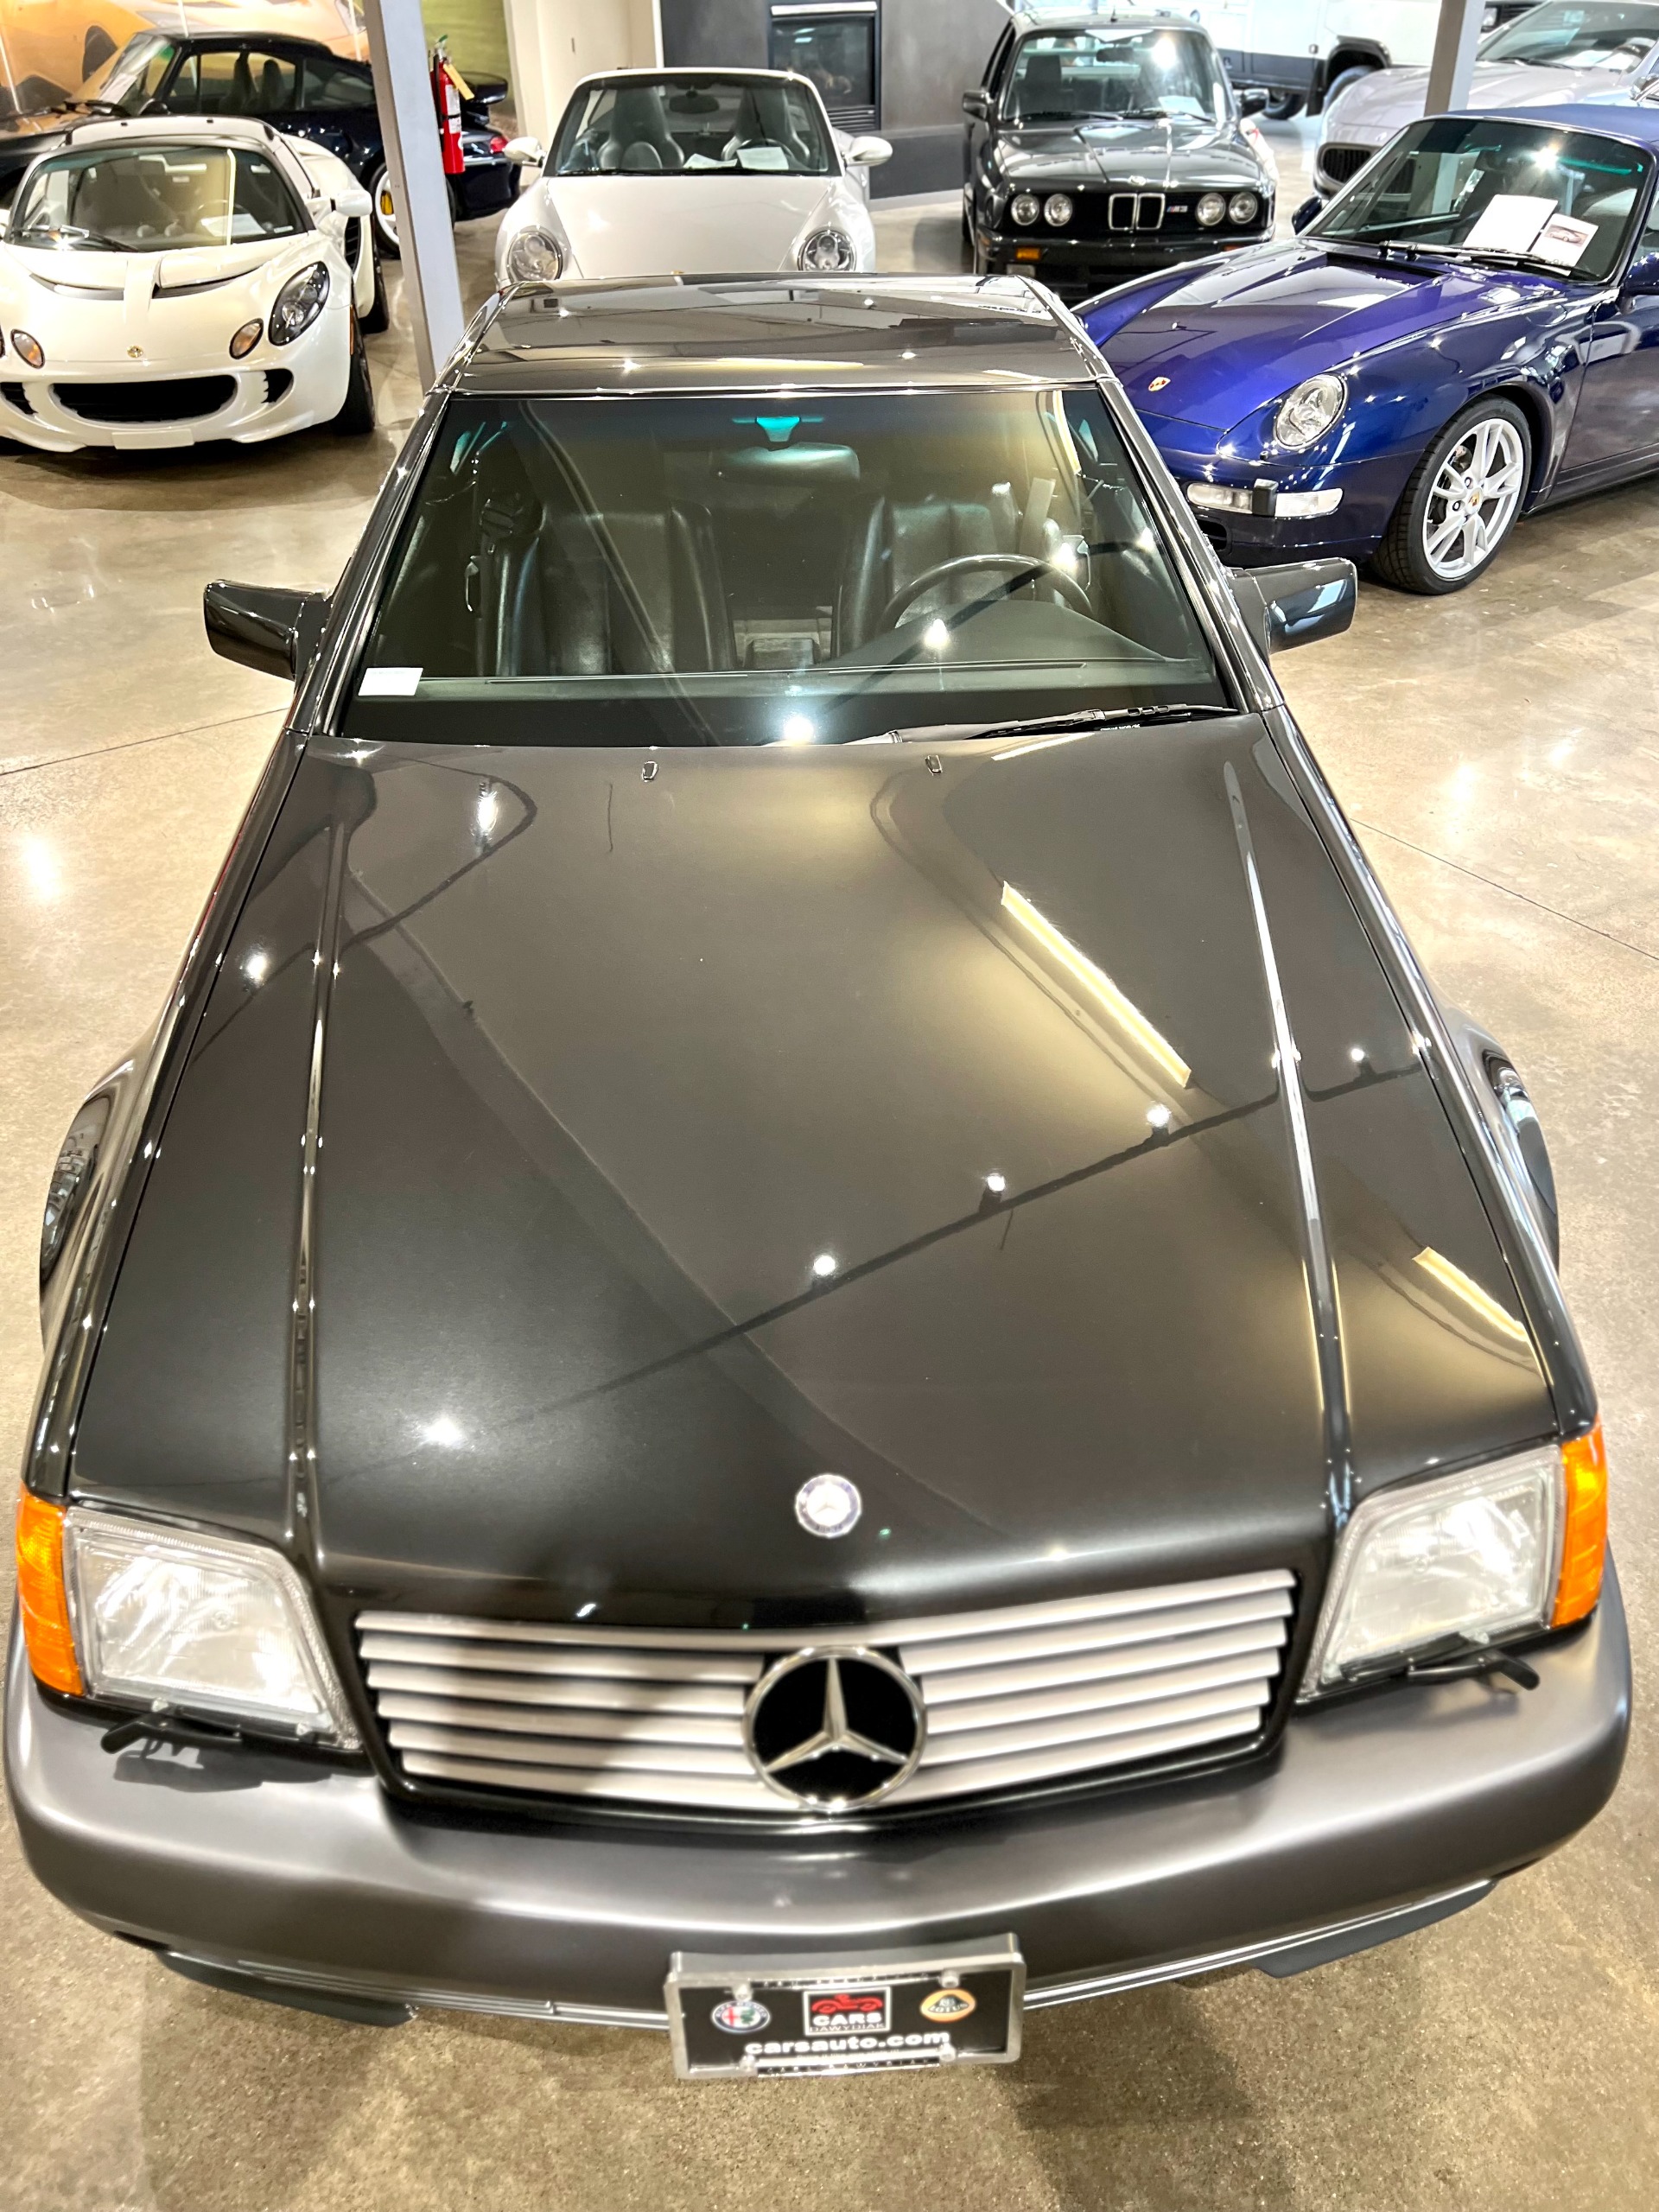 Used 1993 Mercedes Benz 600 Class 600 SL